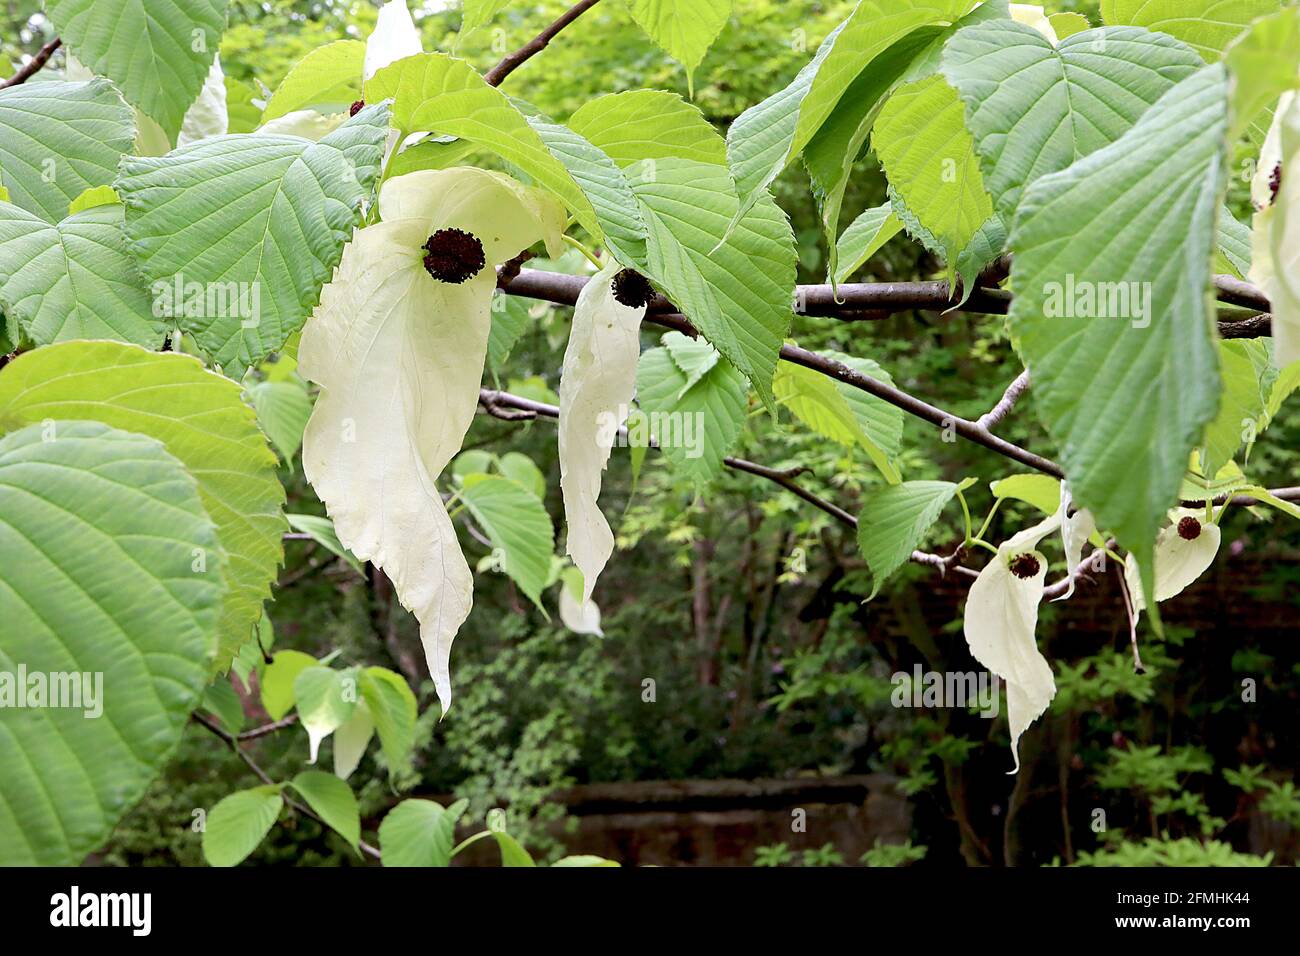 Davidia involucrata ‘Sonoma’ Handkerchief tree – pale green flowers with red anthers enclosed by creamy white leaf-like bracts, vivid green leaves, Stock Photo